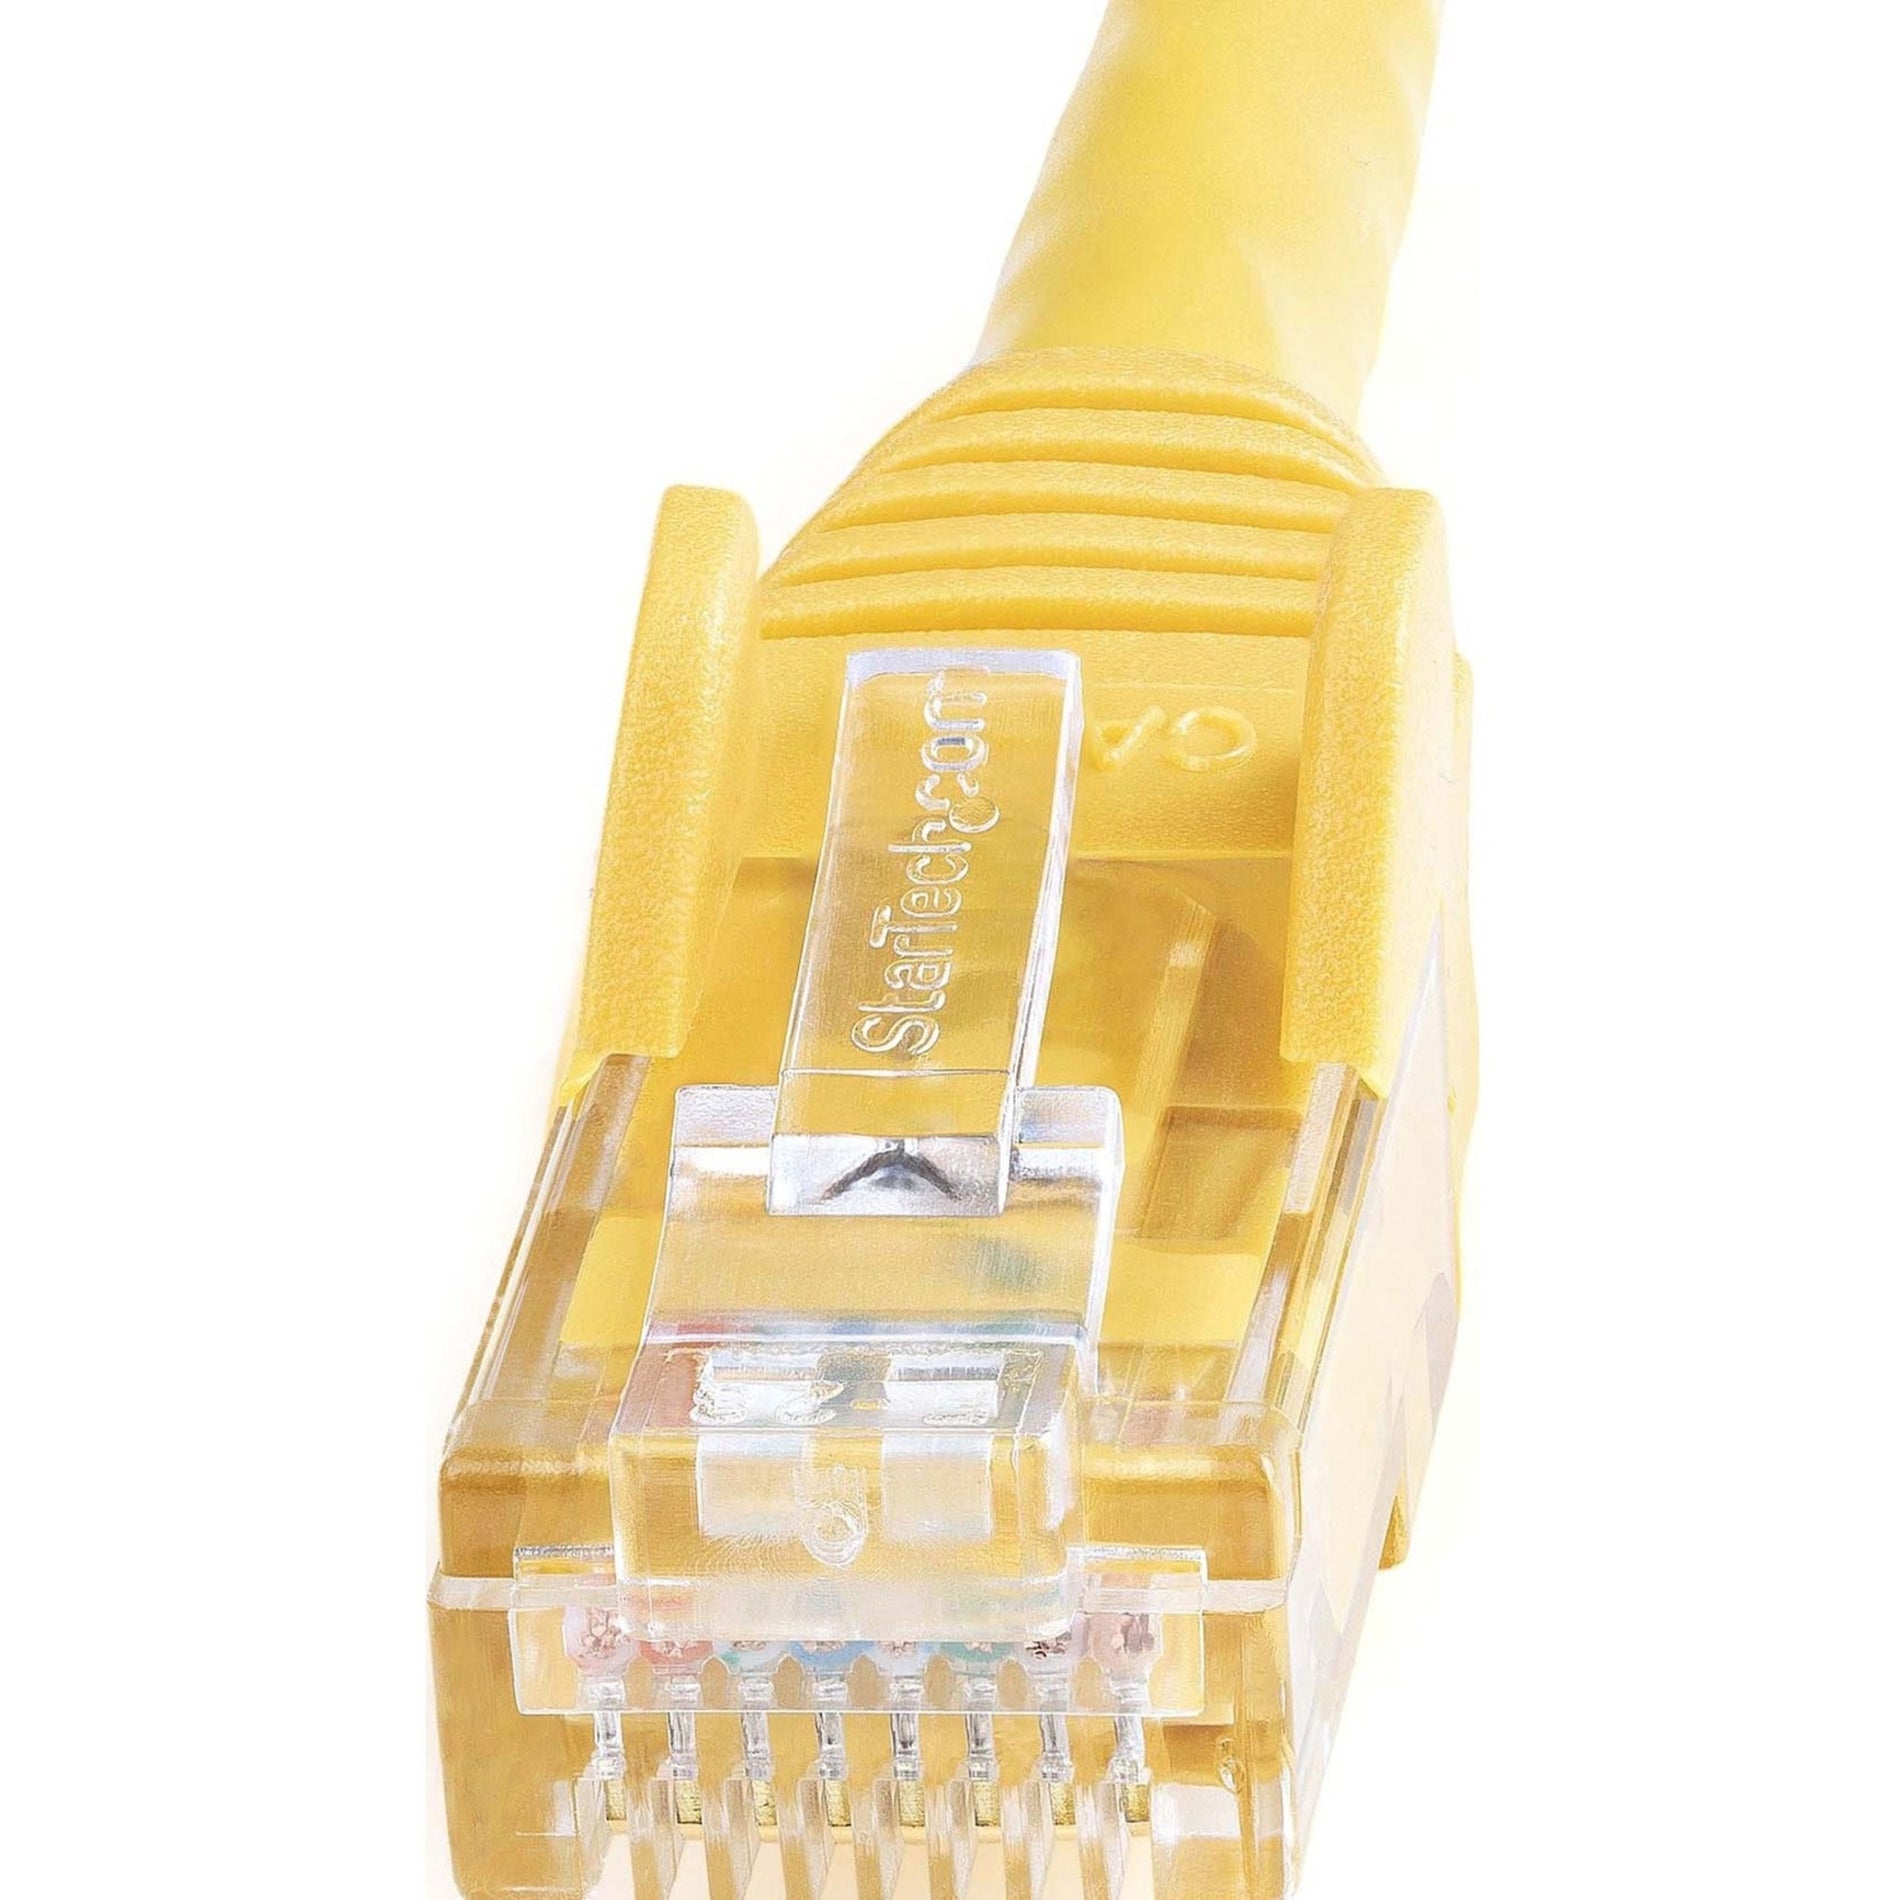 StarTech.com N6PATCH14YL Cat6 Patch Cable, 14ft Yellow Ethernet Cable, Snagless RJ45 Connectors